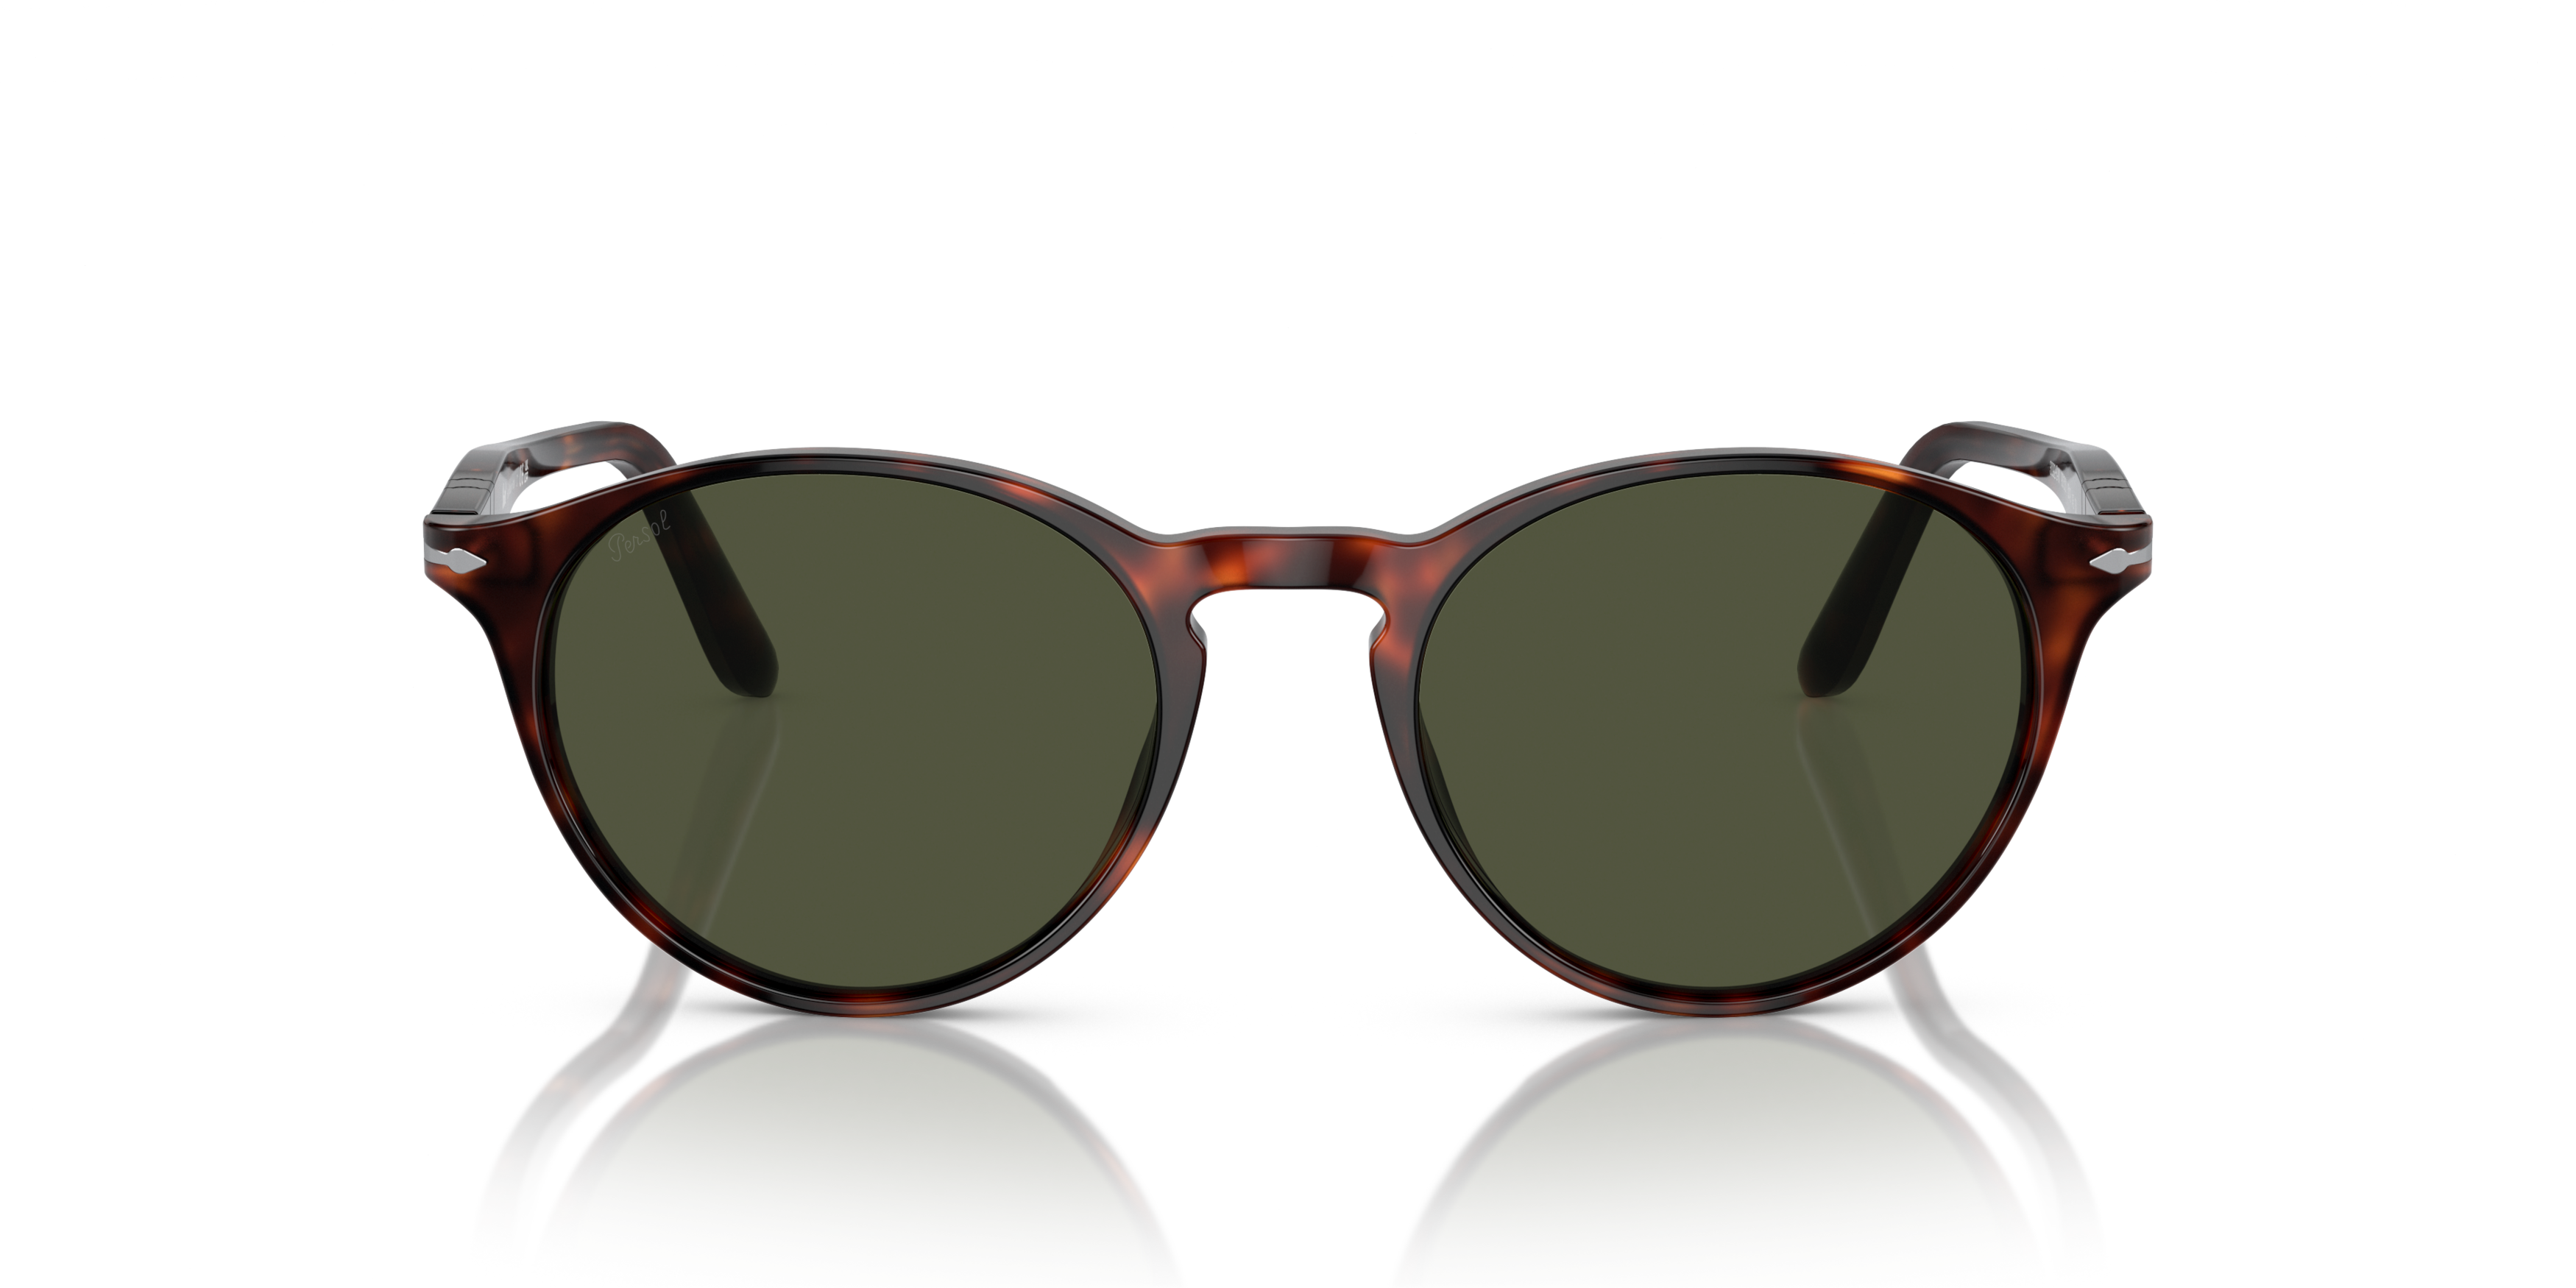 [products.image.front] Persol PO3092SM 901531